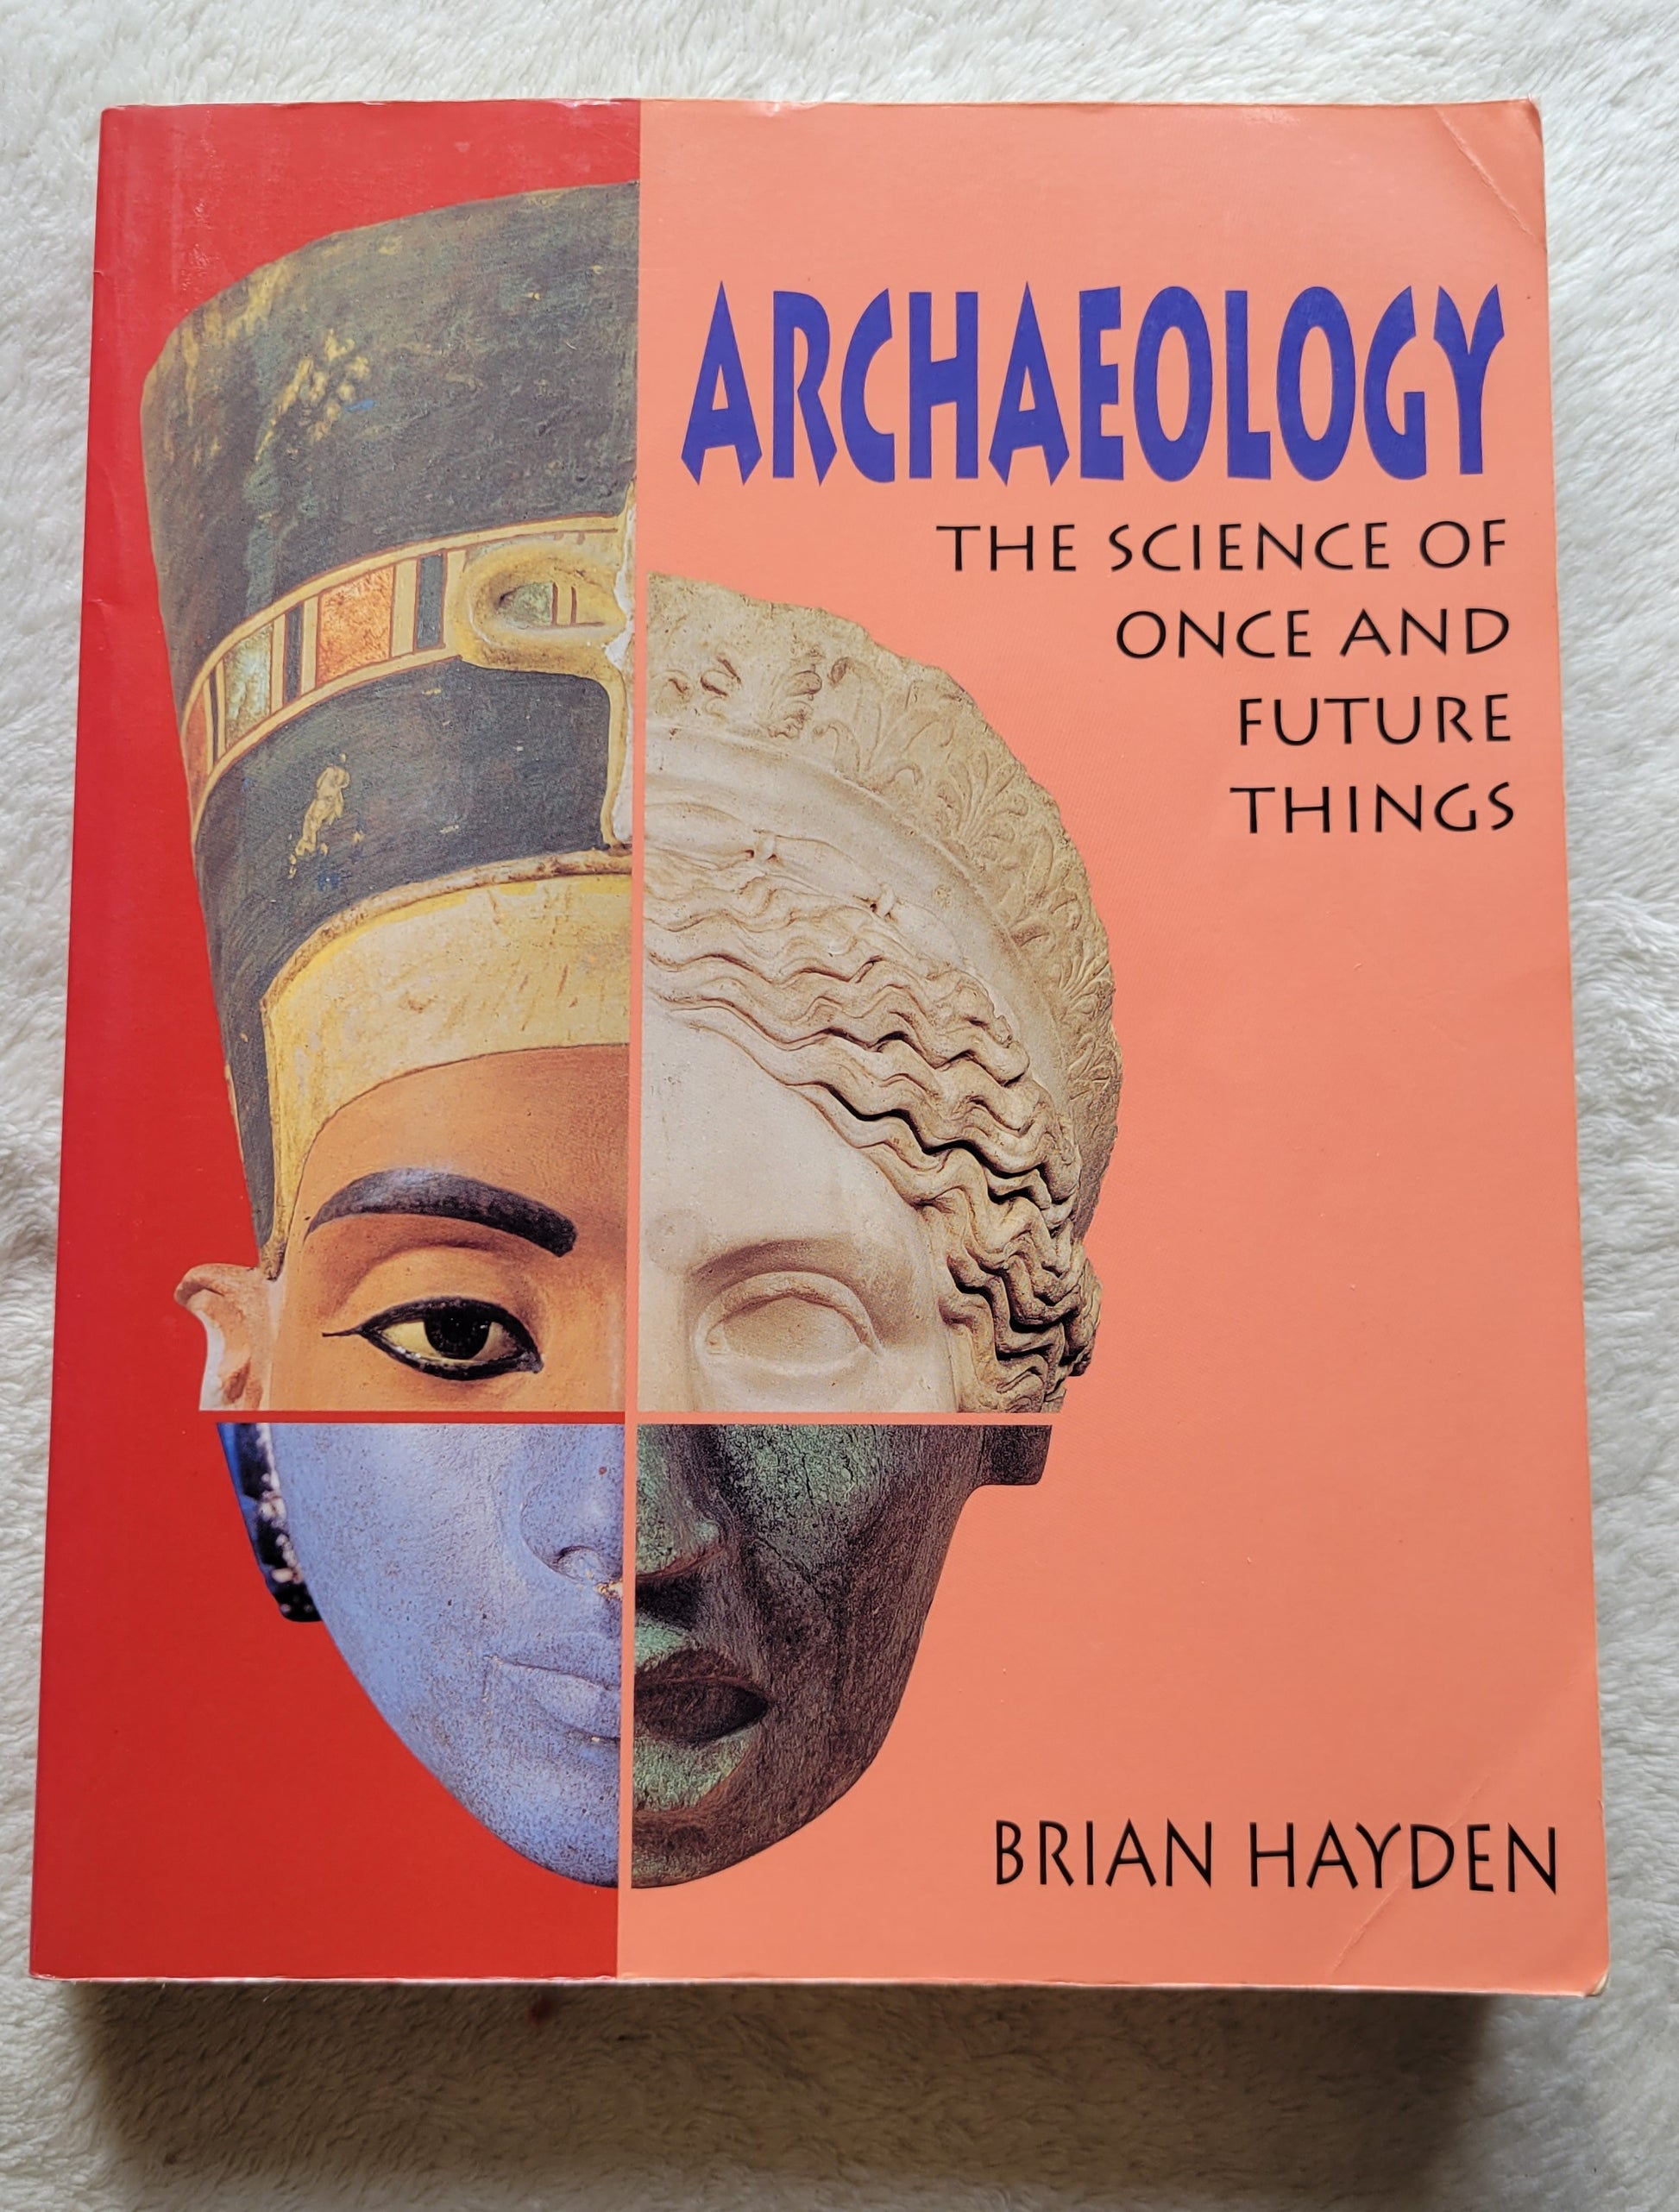 "Archaeology: The Science of Once and Future Things" by Brian Hayden, W. H. Freeman and Company, 1993. "Archaeology: The Science of Once and Future Things shows how objects recovered from the earth are used to reconstruct past societies and interpret the major events in the long space of human culture. It is concise and richly information introduction to the archaeologist's basic concepts, methods, and tools."  Front  view.